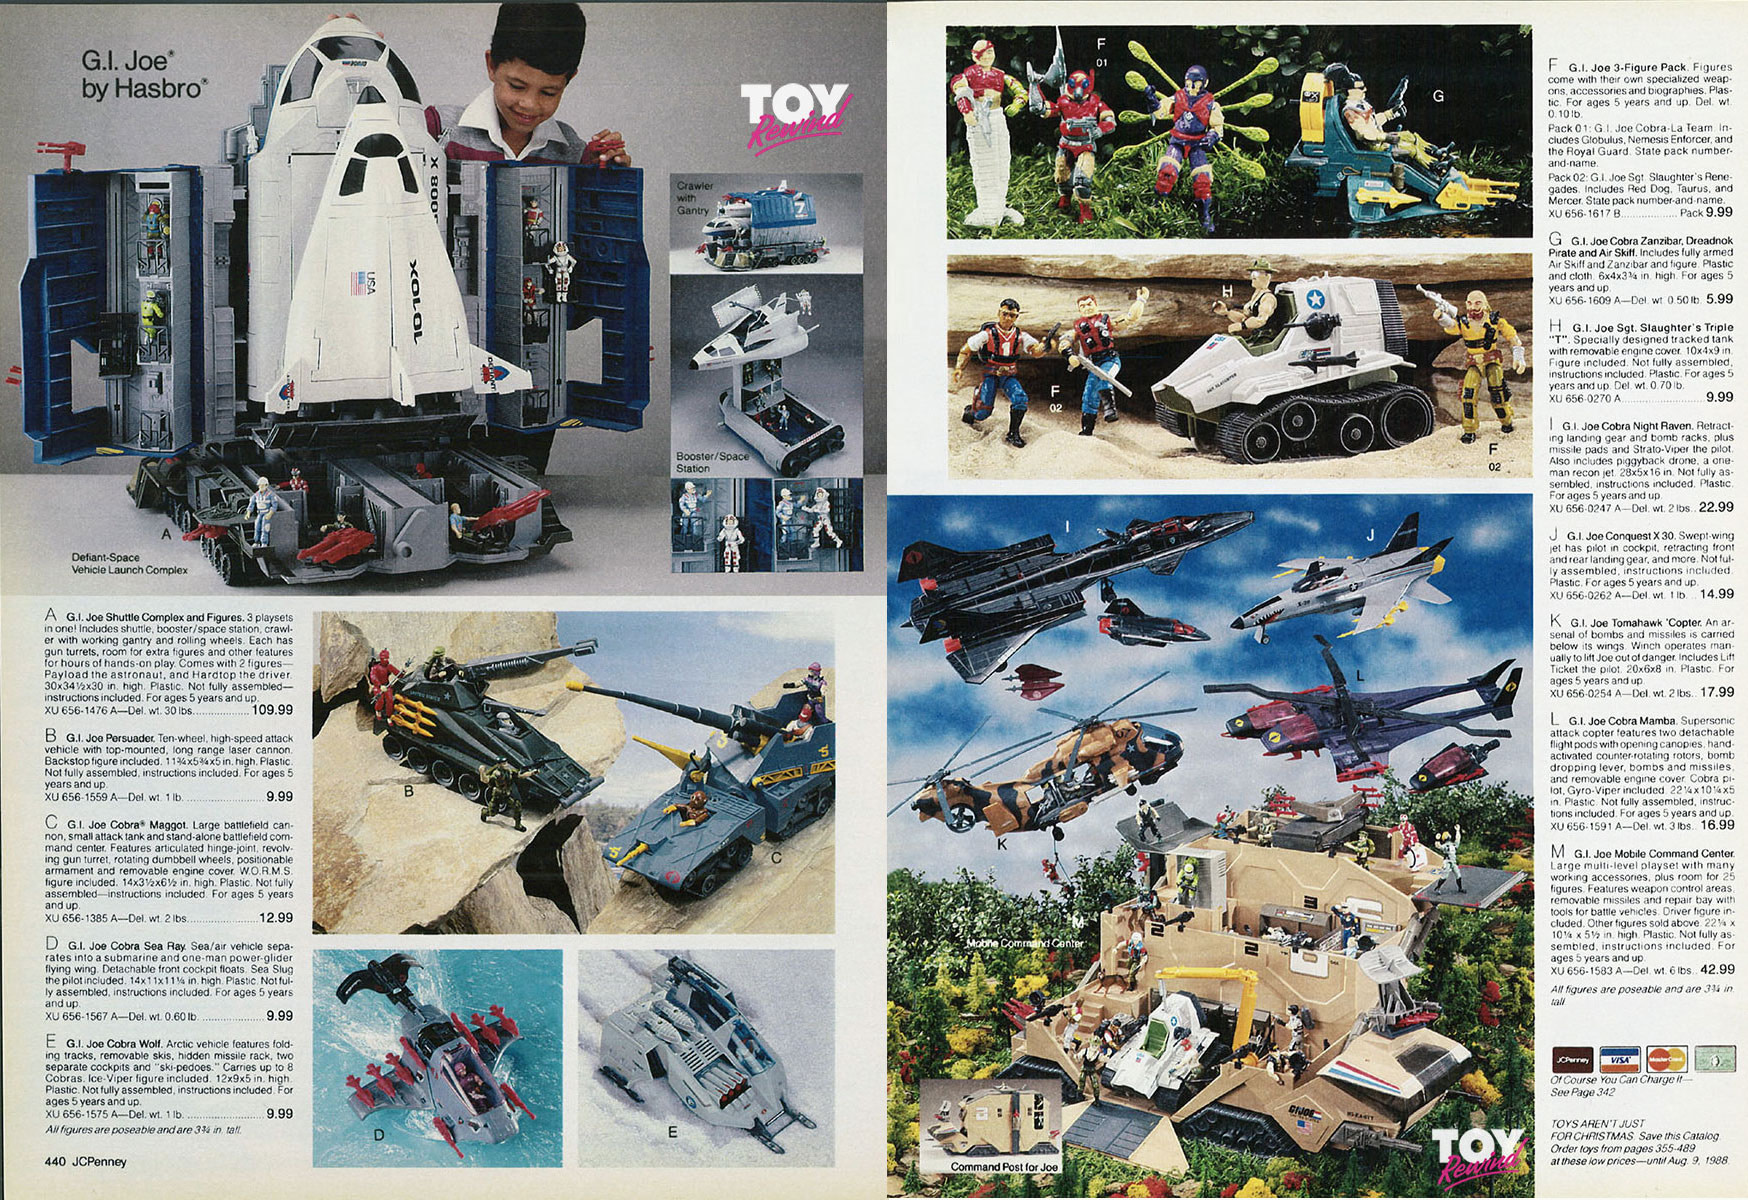 jcpenney toy catalog 2017